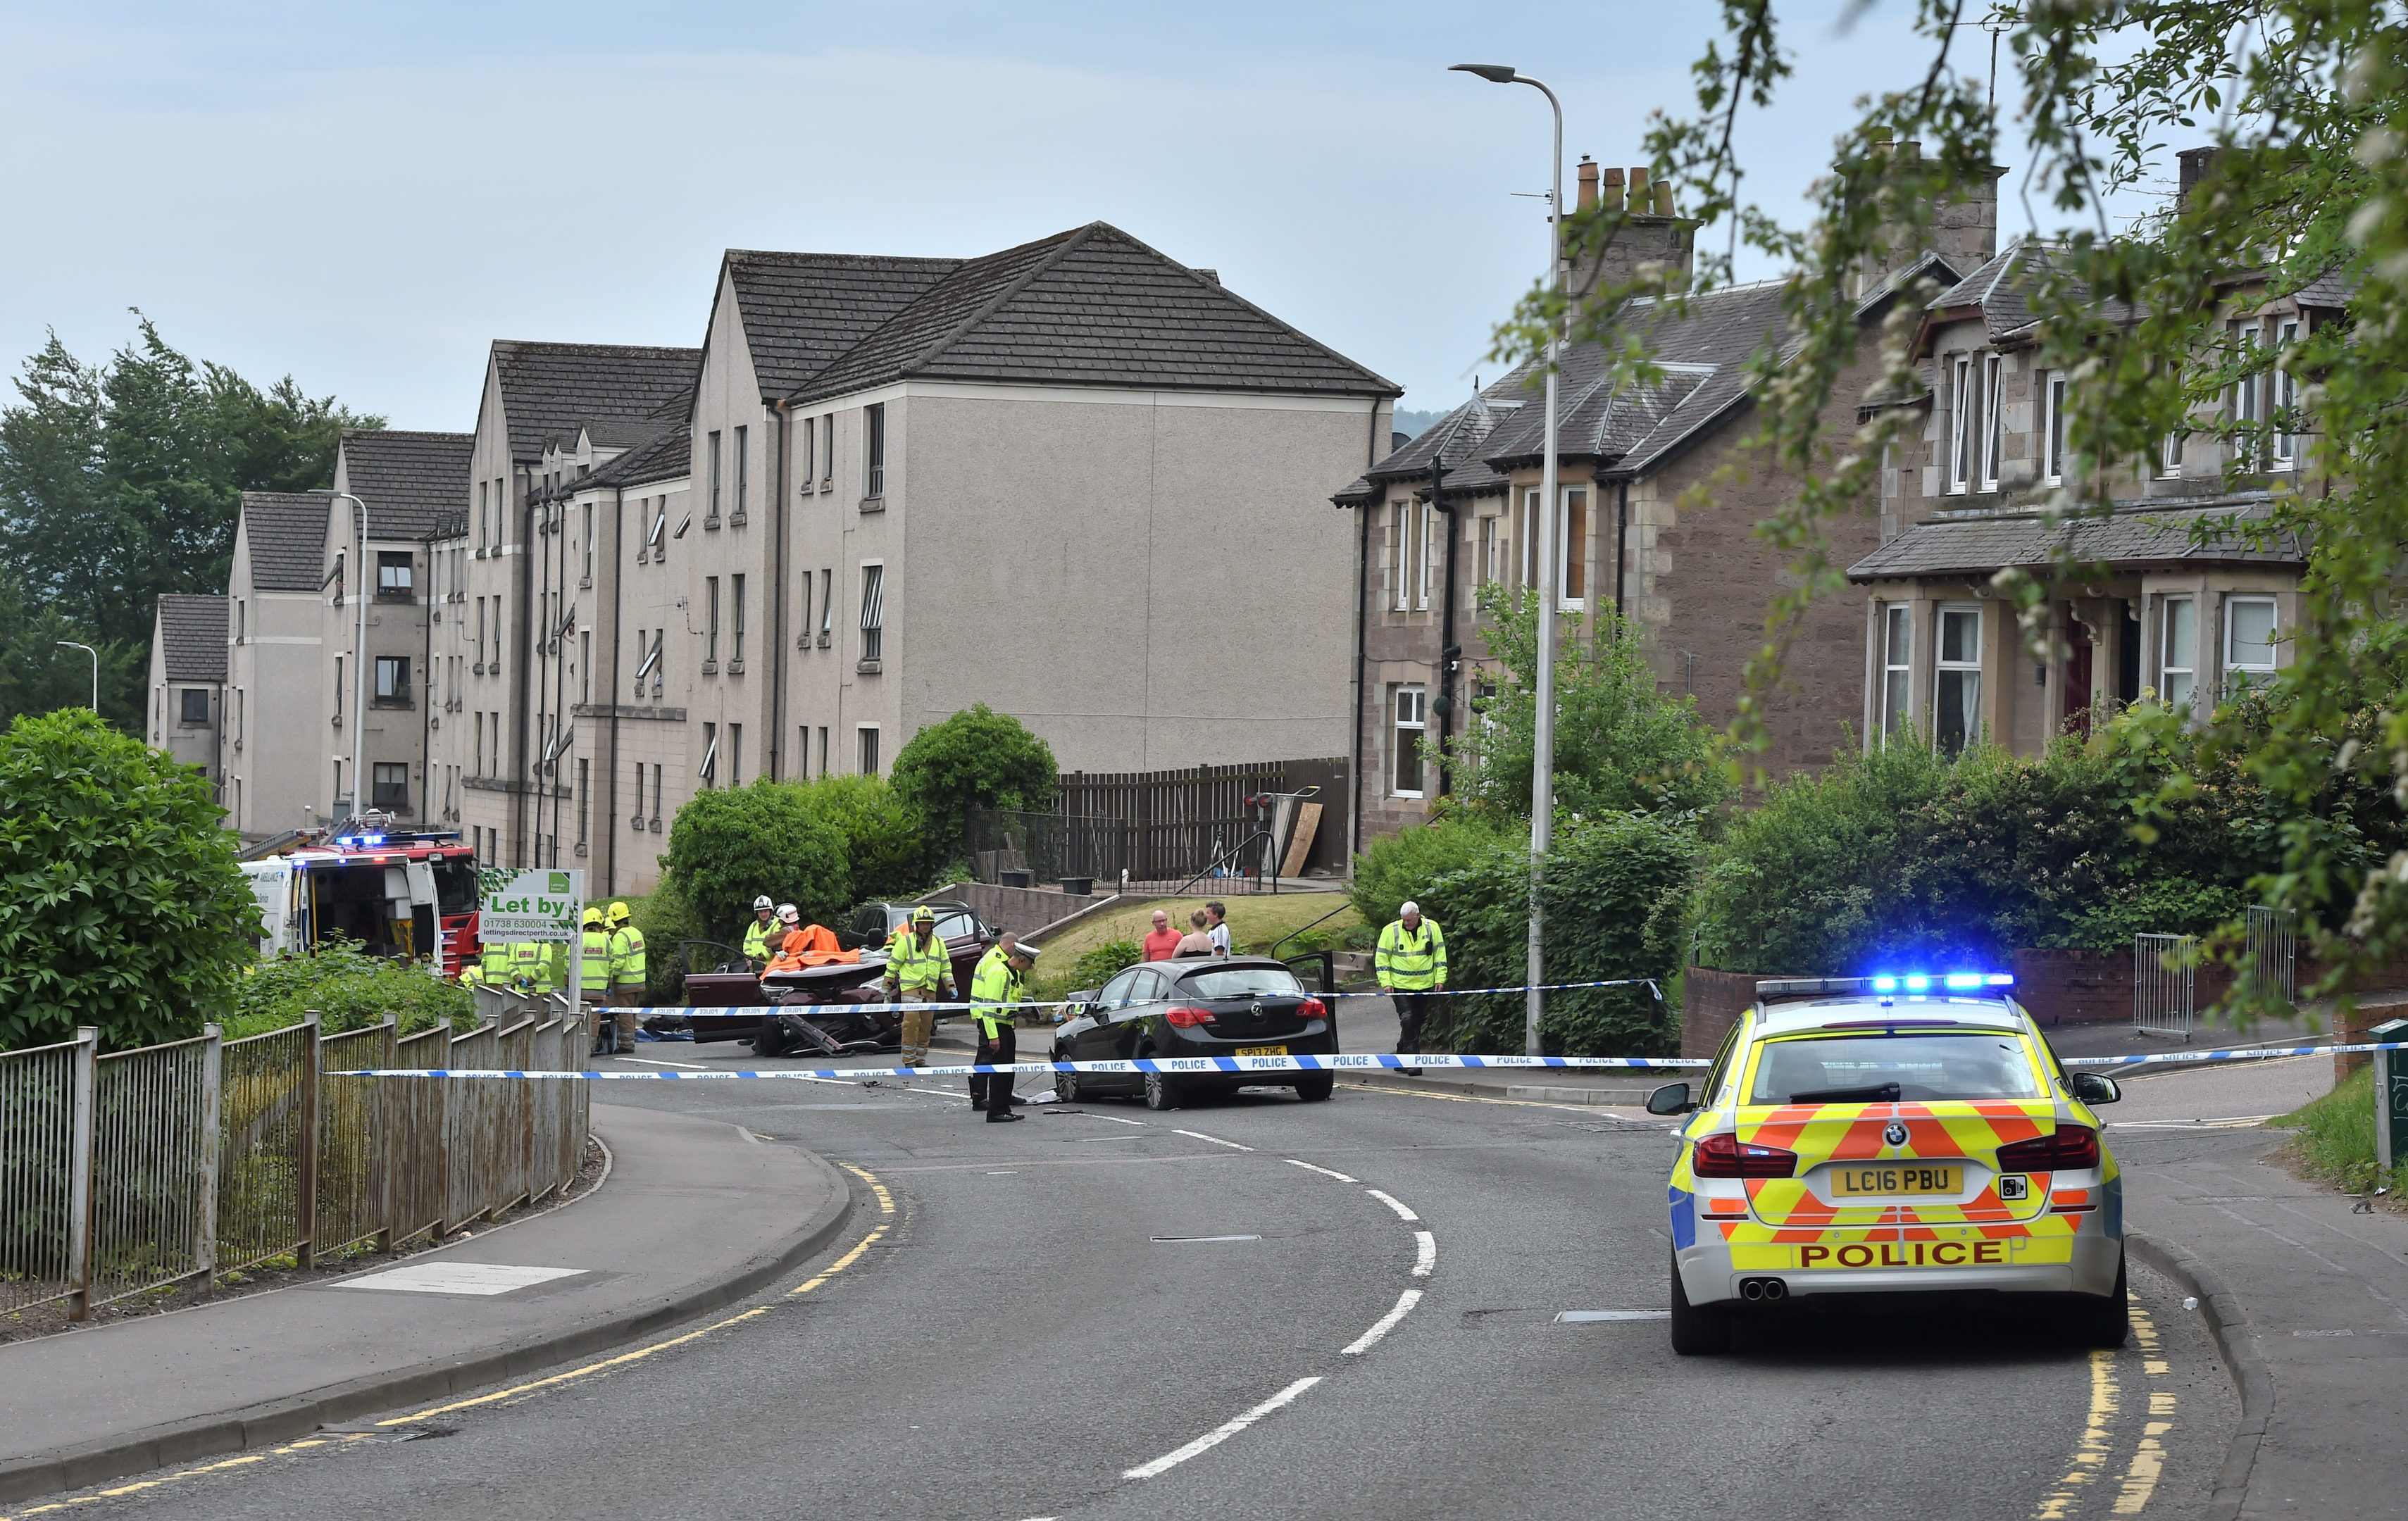 The accident scene on Crieff Road.